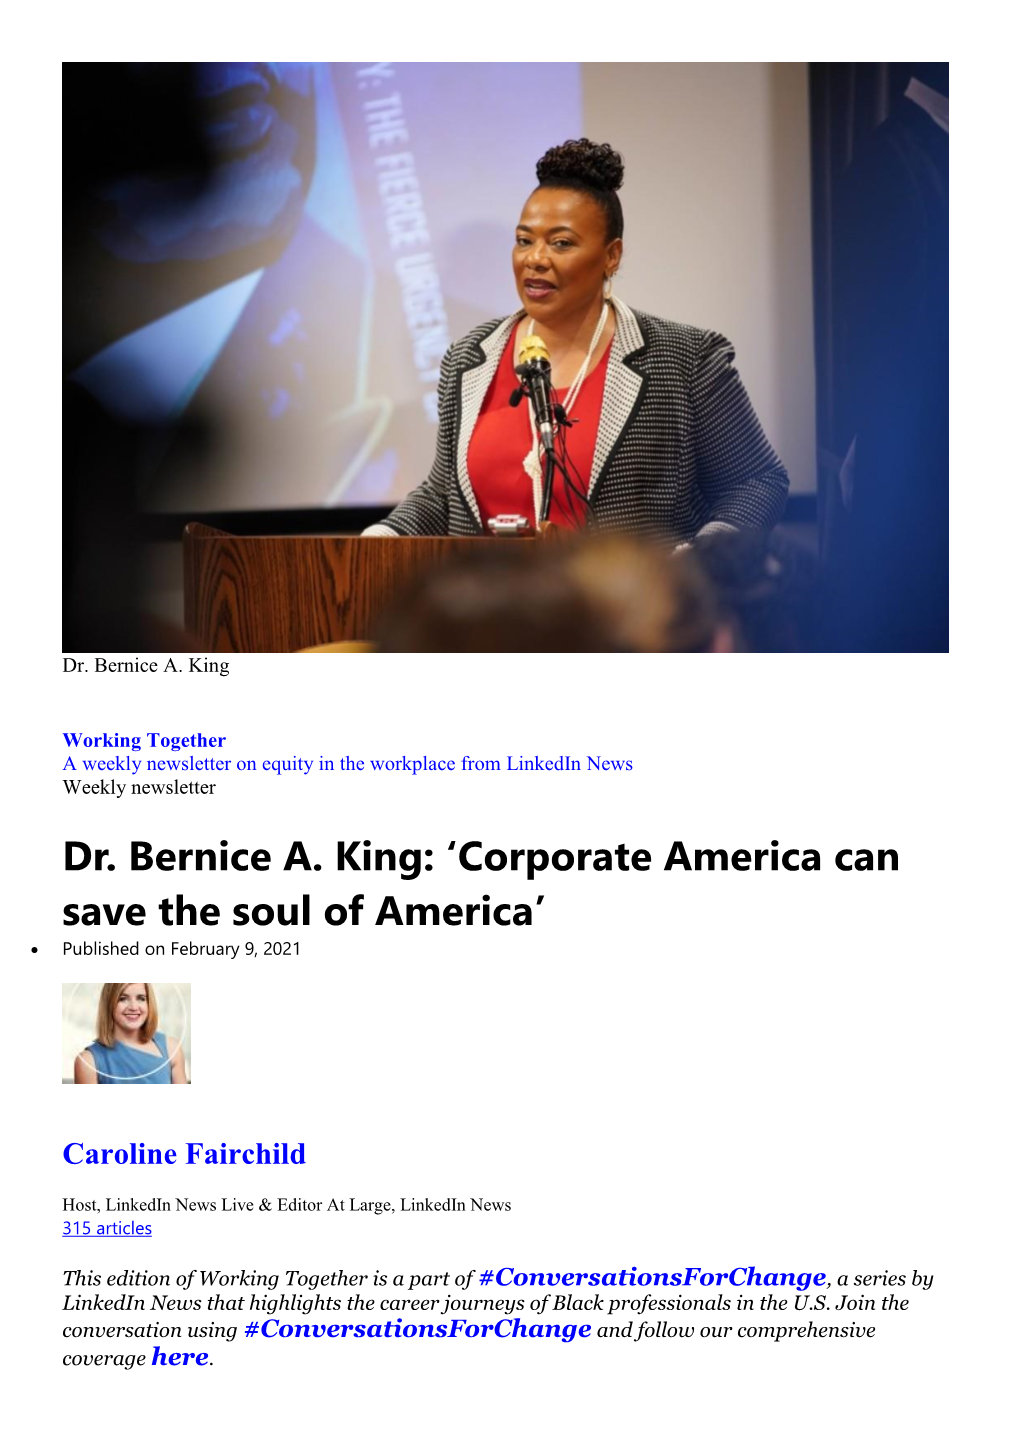 Dr. Bernice A. King: 'Corporate America Can Save the Soul of America'